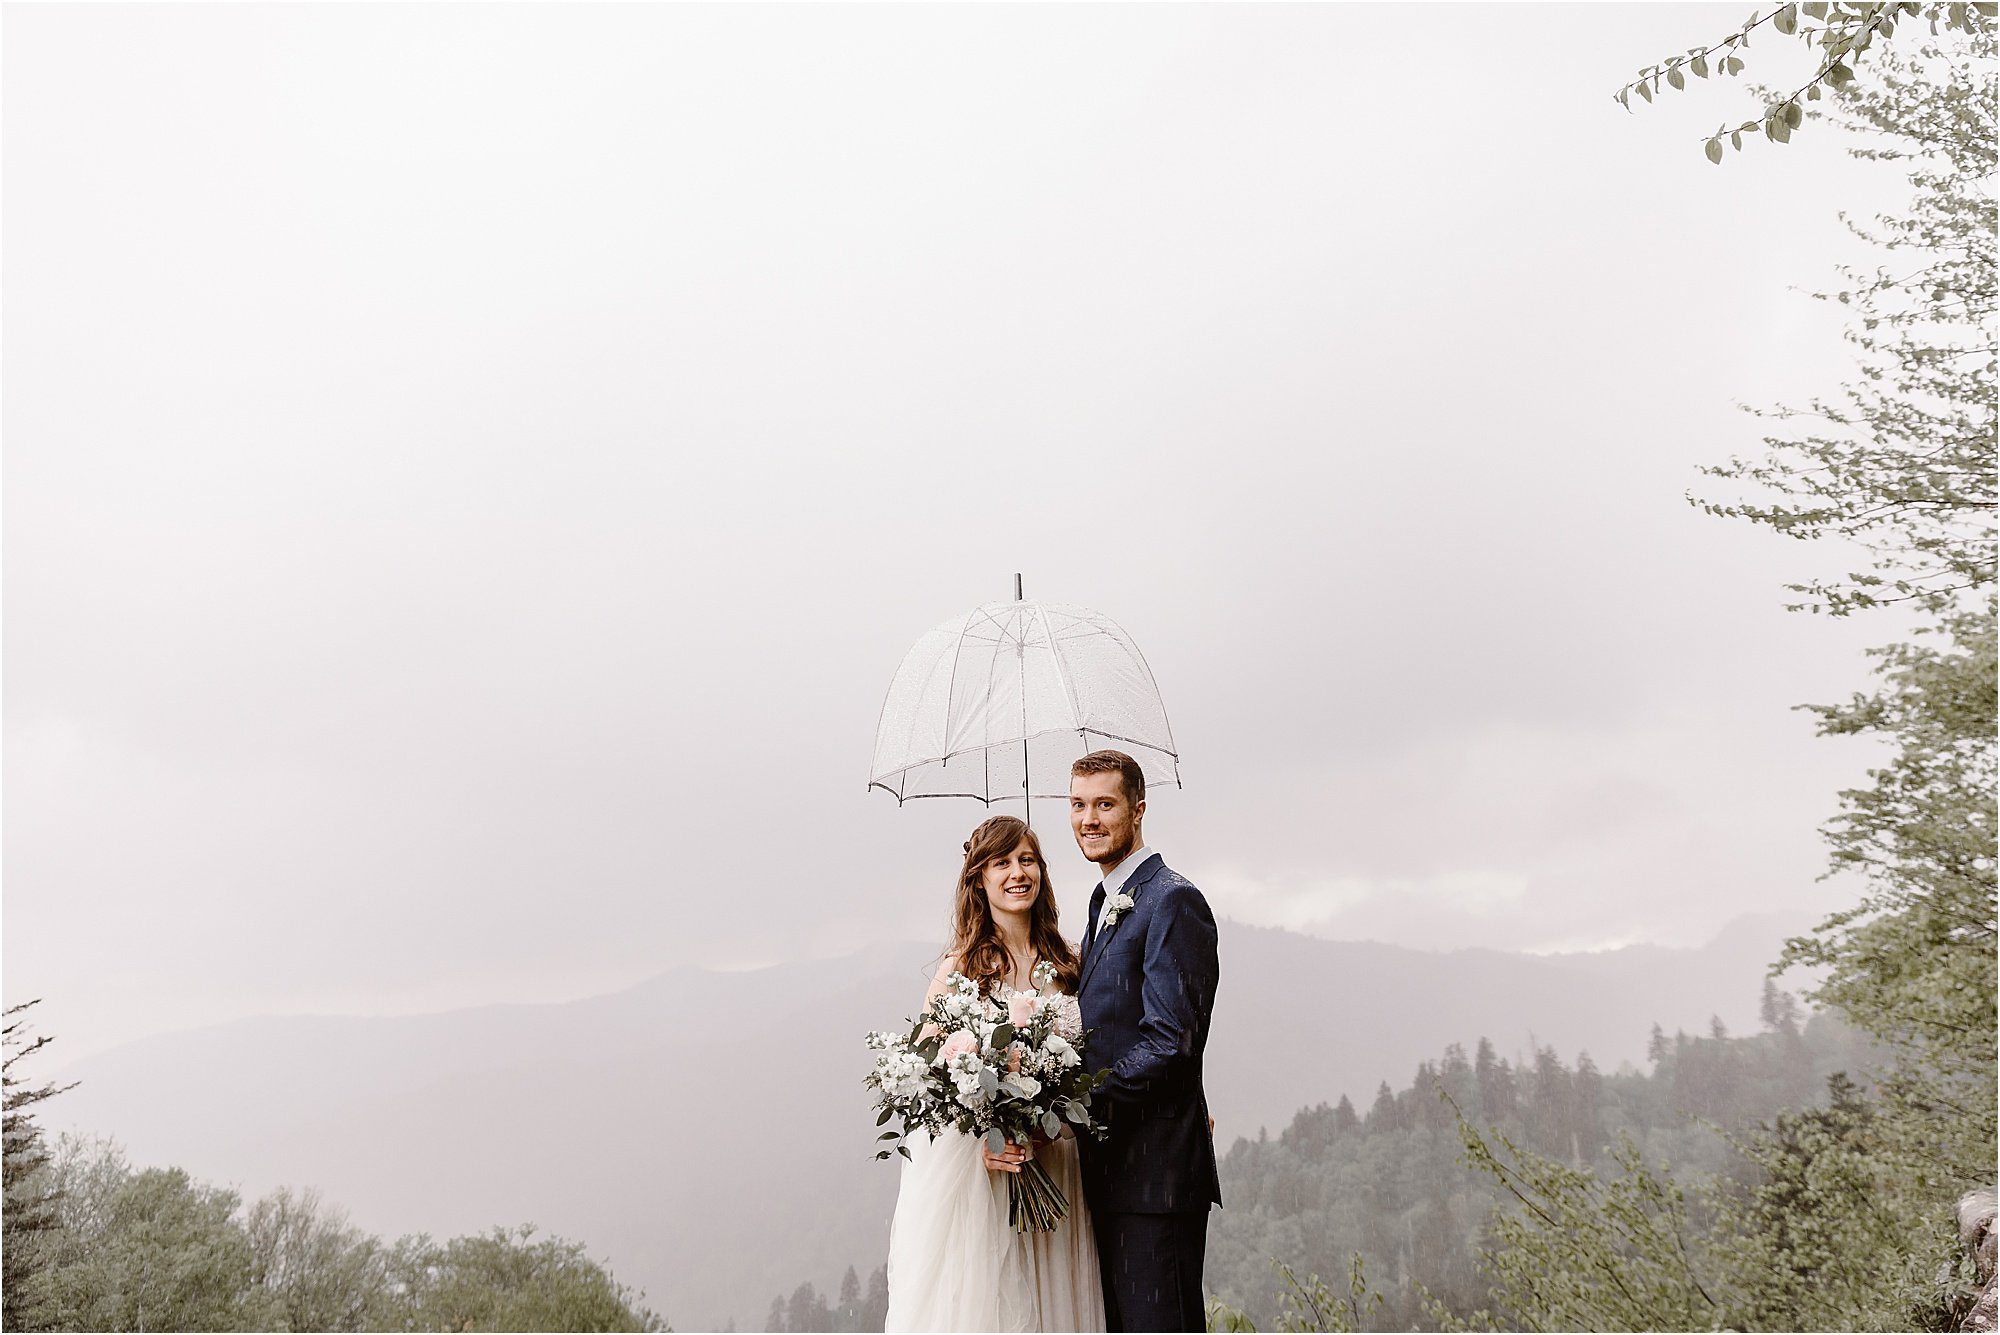 bride and groom stand under clear umbrella during rainy wedding day